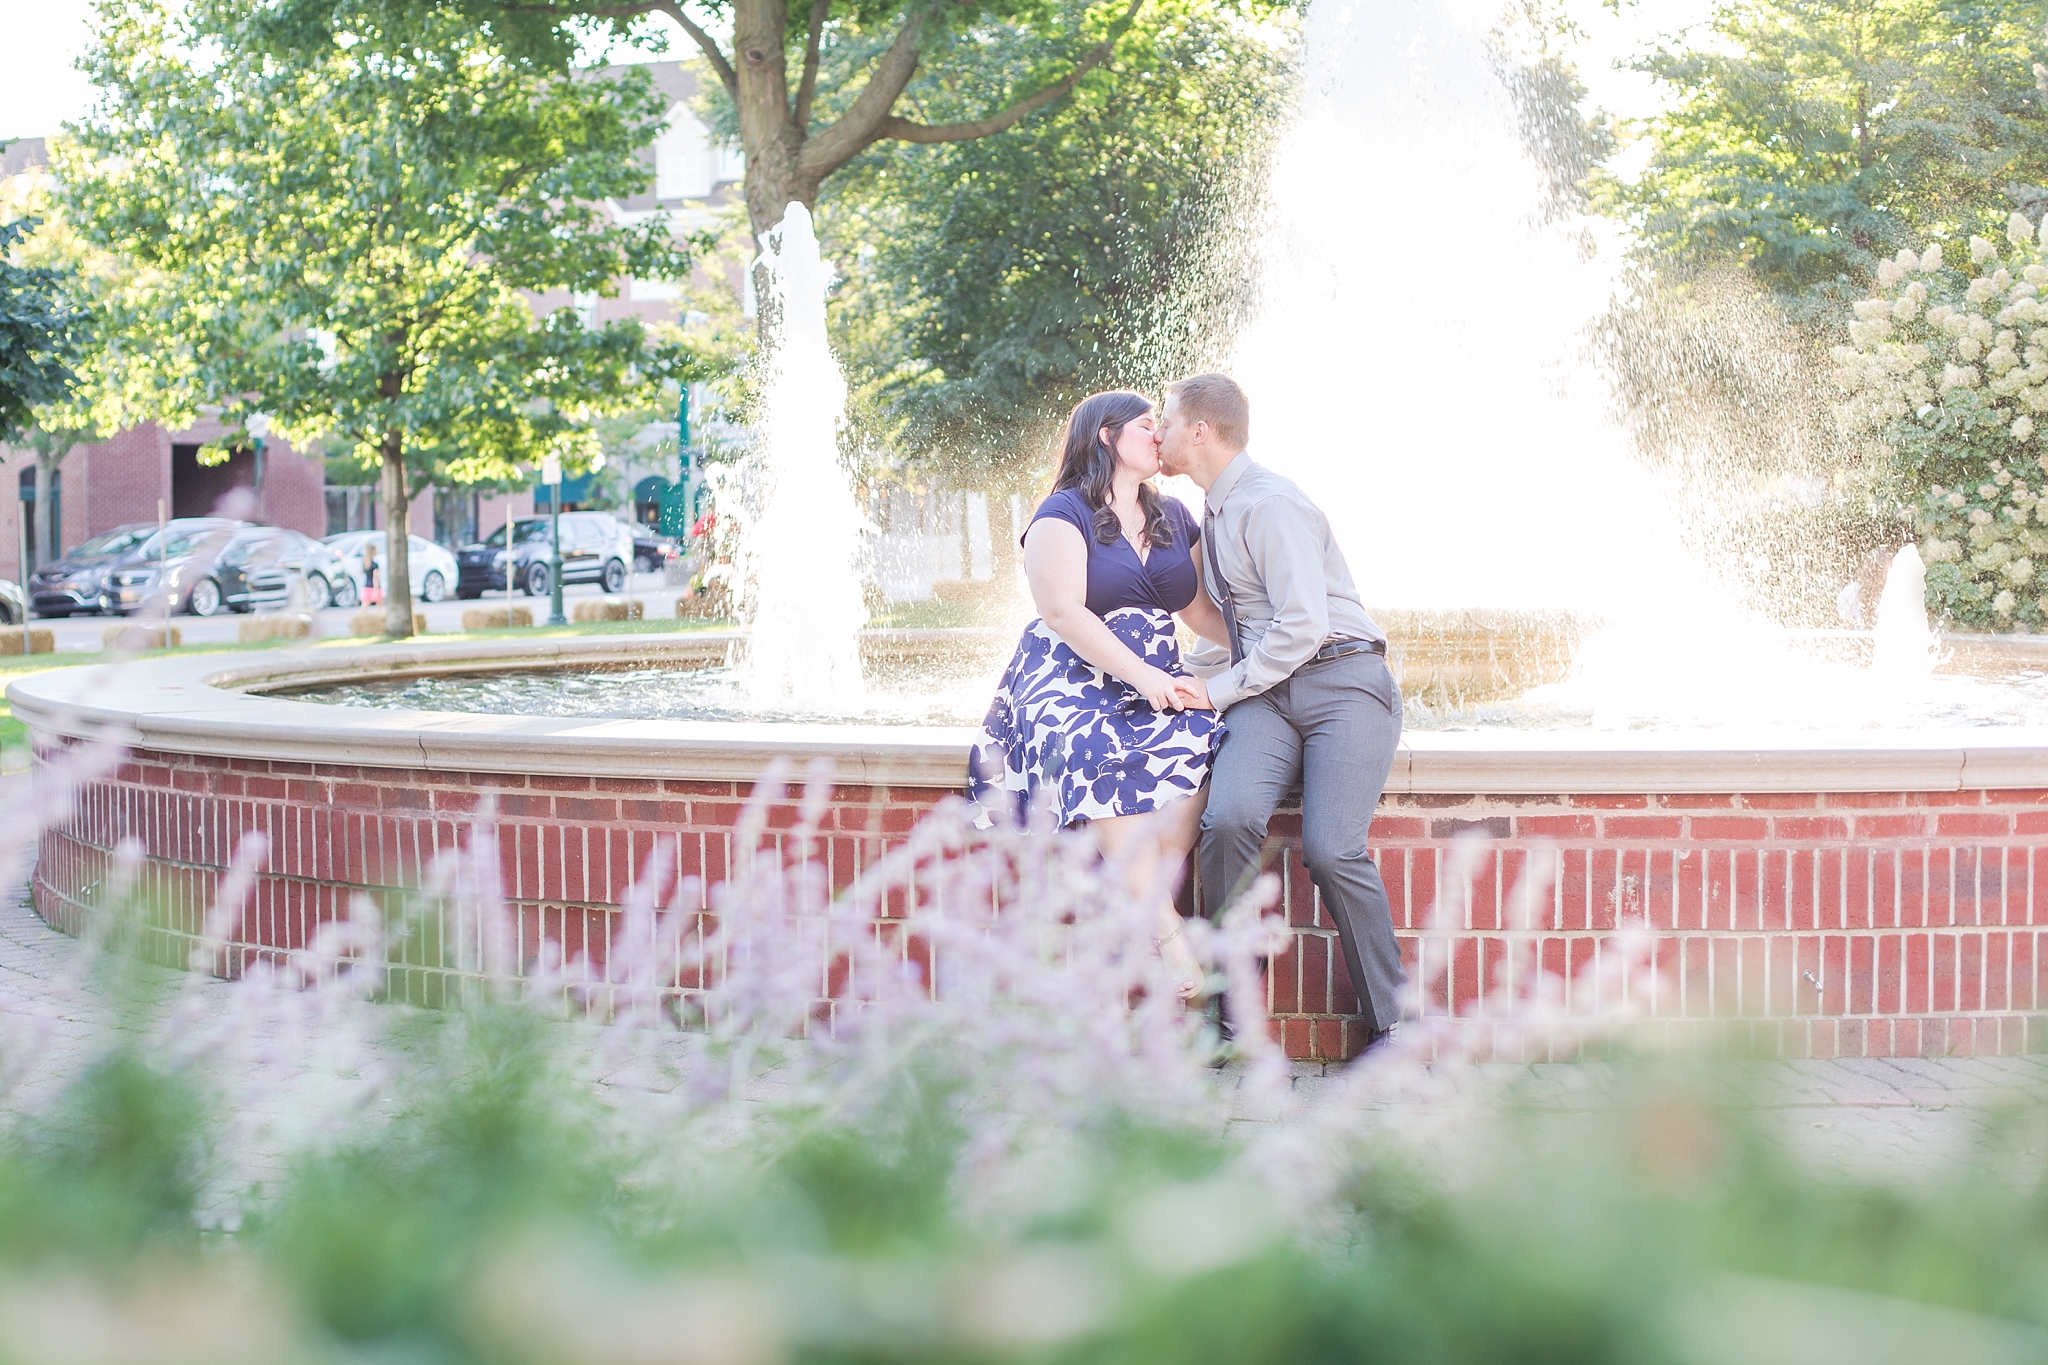 fun-fall-engagement-photos-in-downtown-plymouth-michigan-by-courtney-carolyn-photography_0007.jpg